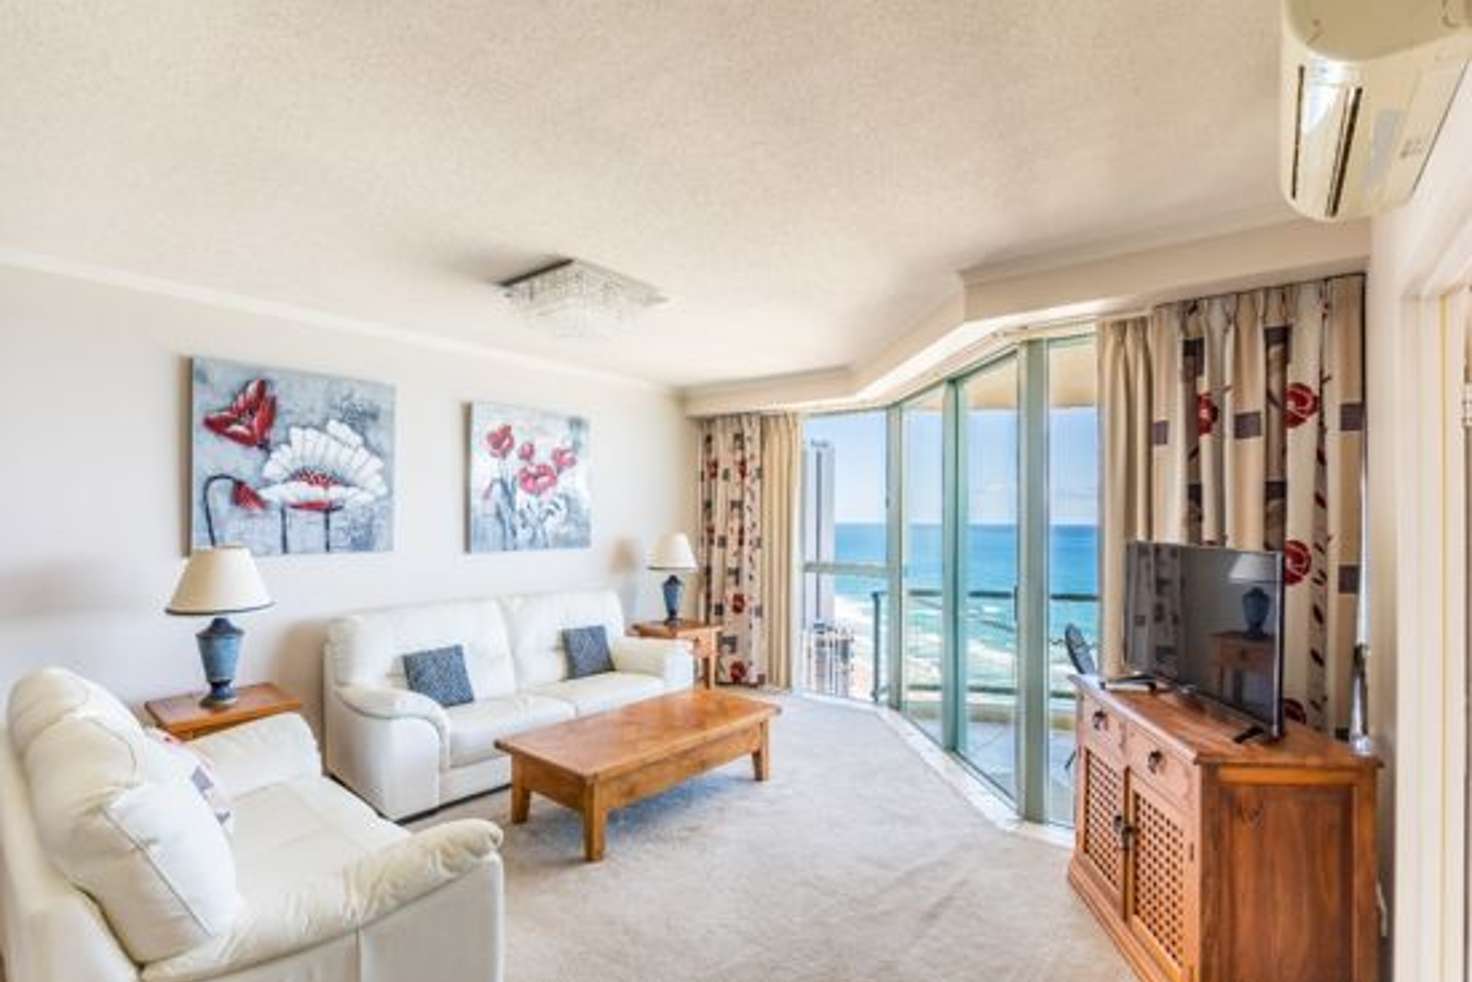 Main view of Homely apartment listing, 3400 Gold Coast Hwy, Surfers Paradise QLD 4217, Surfers Paradise QLD 4217